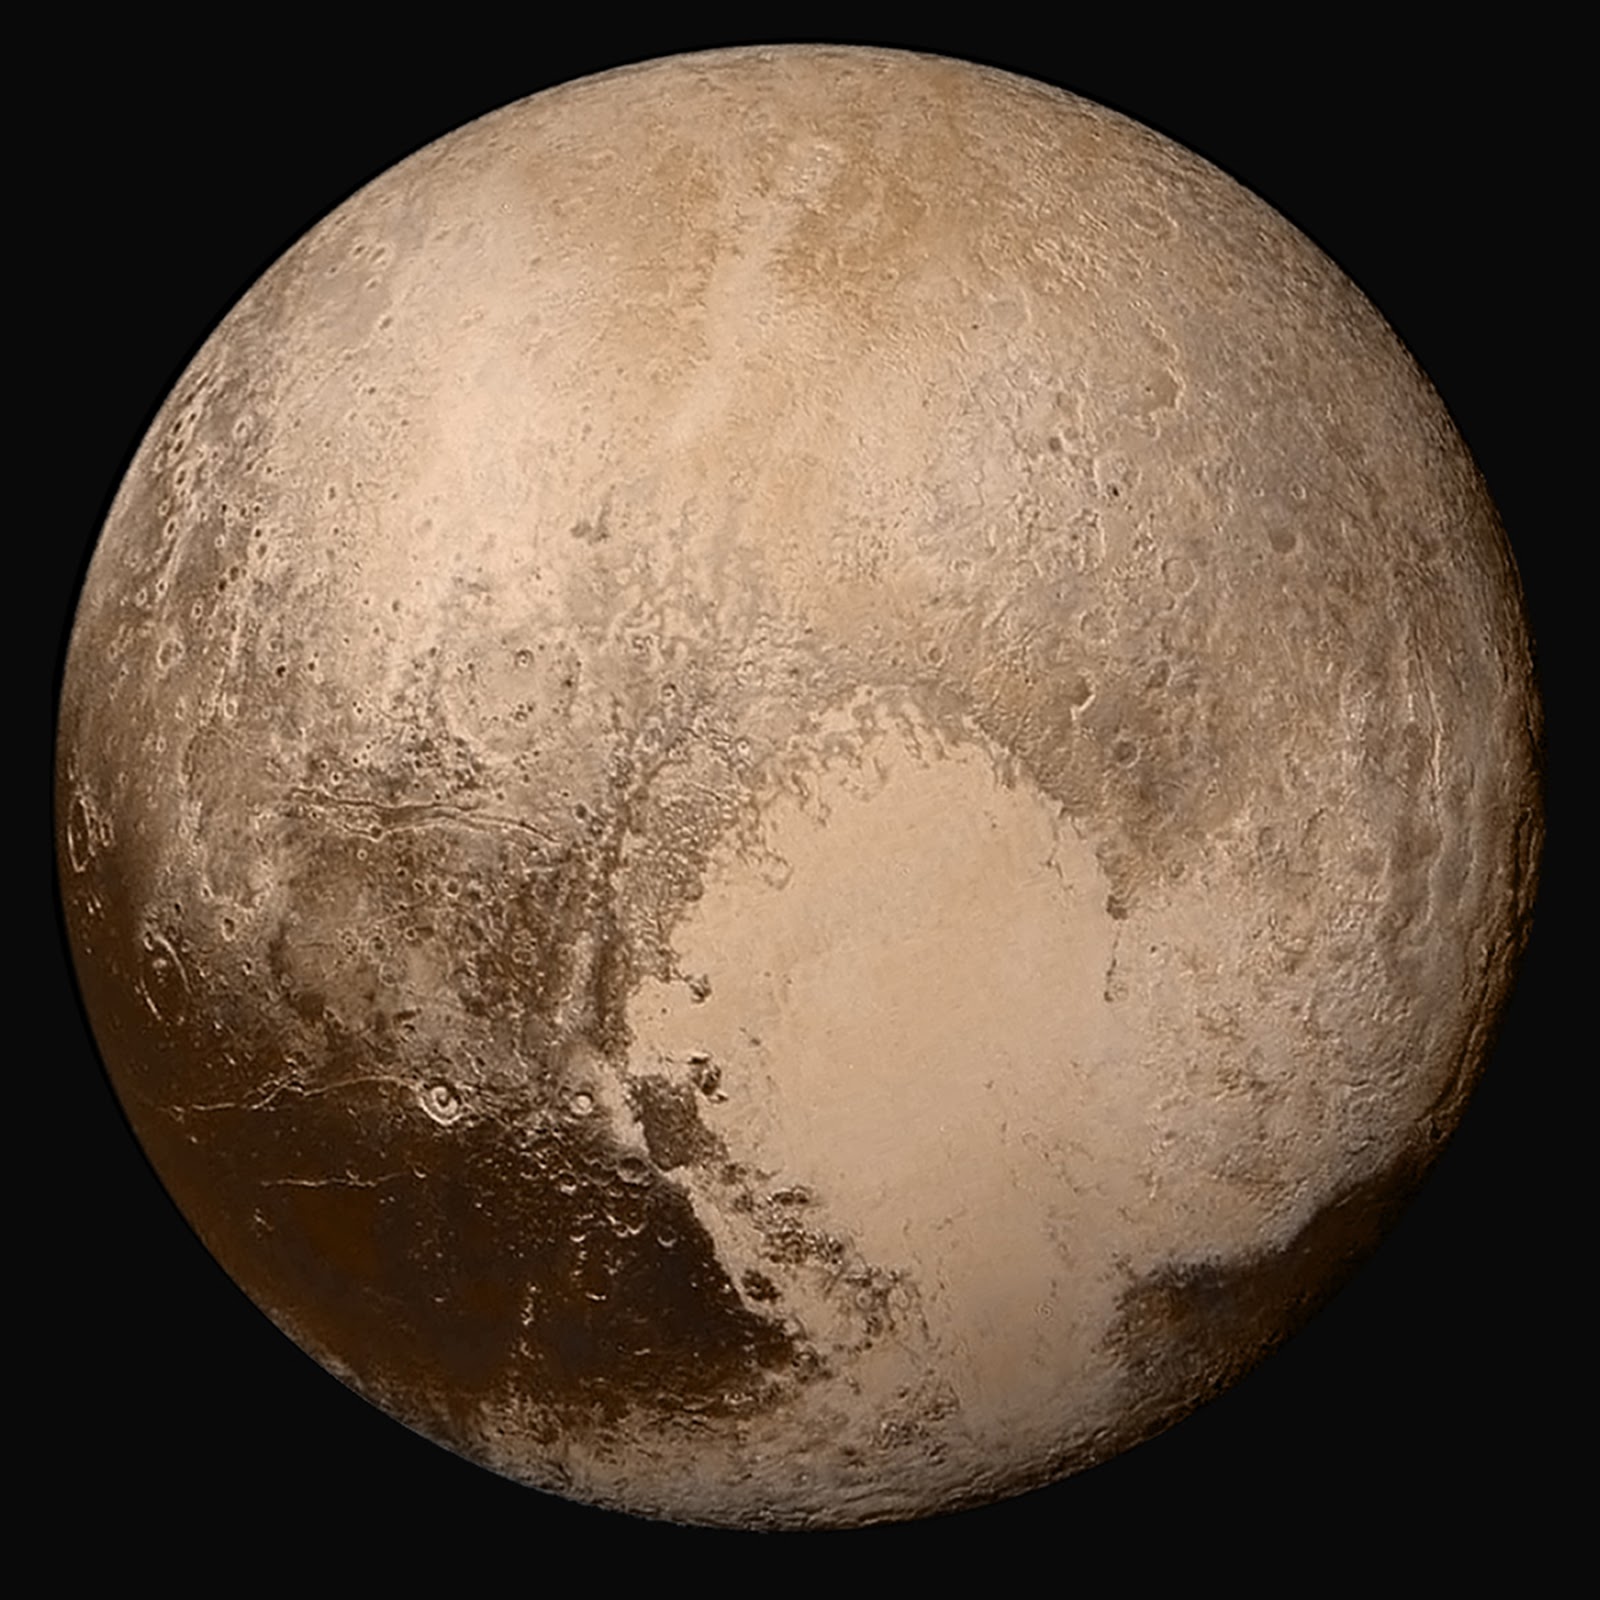 File:Nh-pluto-in-true-color 2x JPEG.jpg - Wikimedia Commons